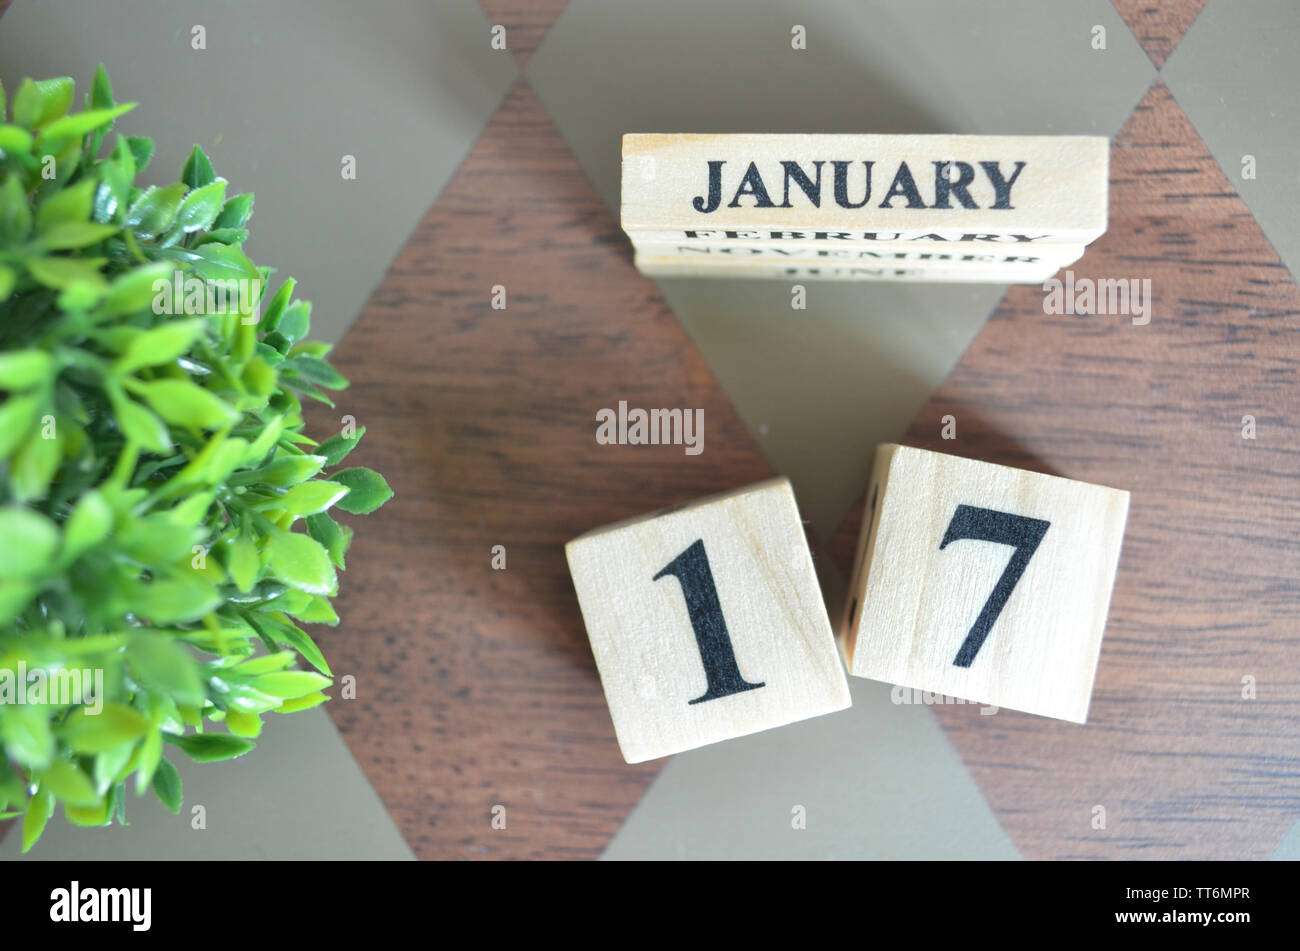 Date of February month with leaf on diamond pattern table for background. Stock Photo